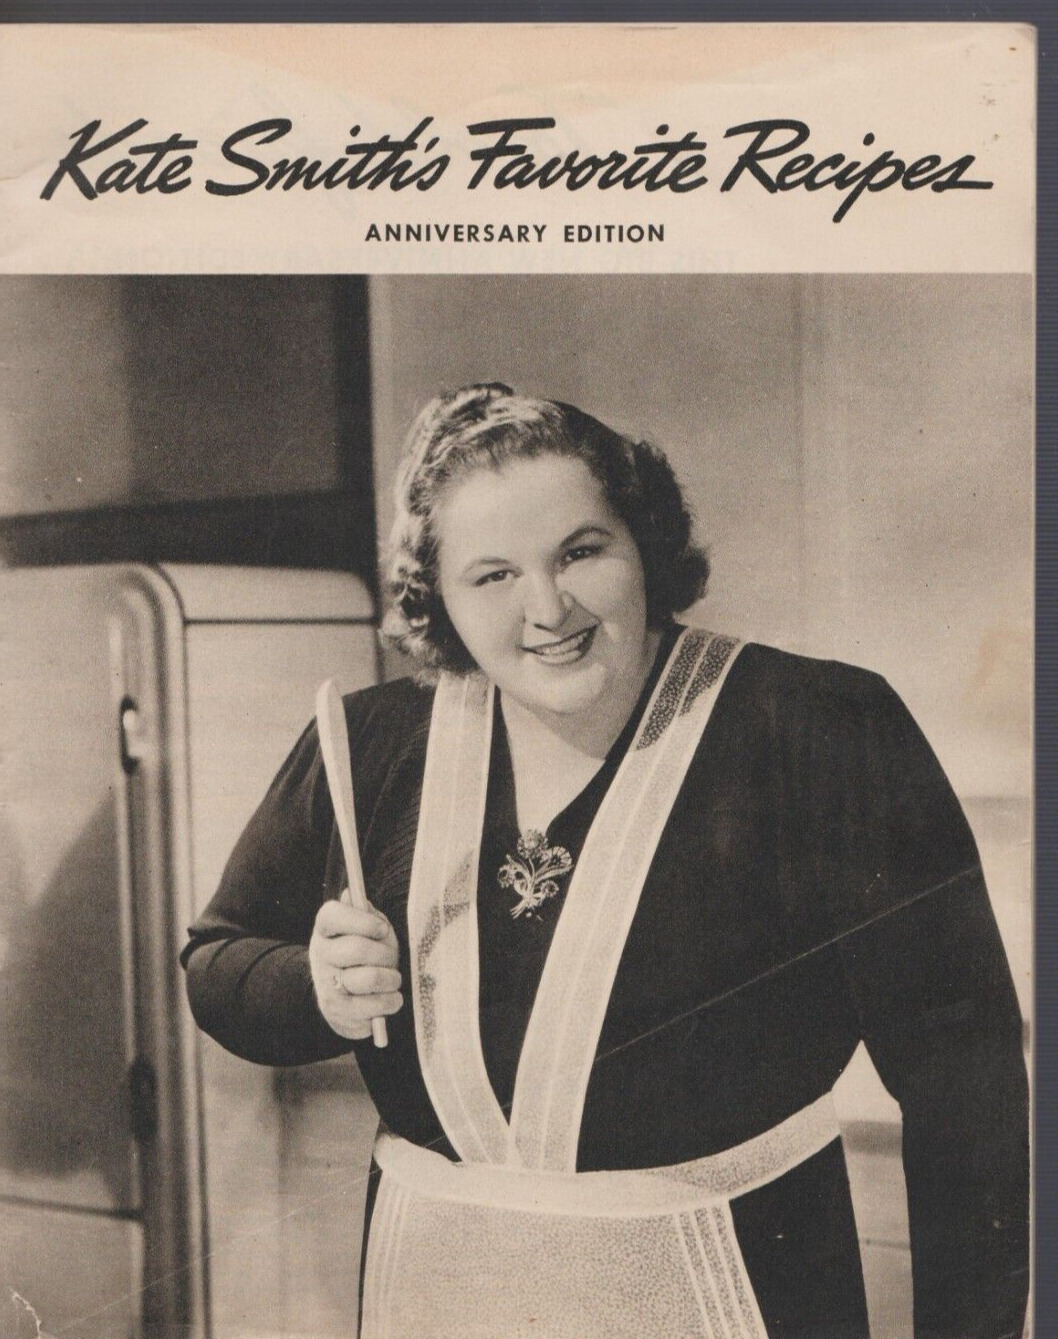 Kate Smith’s Favorite Recipes Anniversary Edition cookbook 1940s